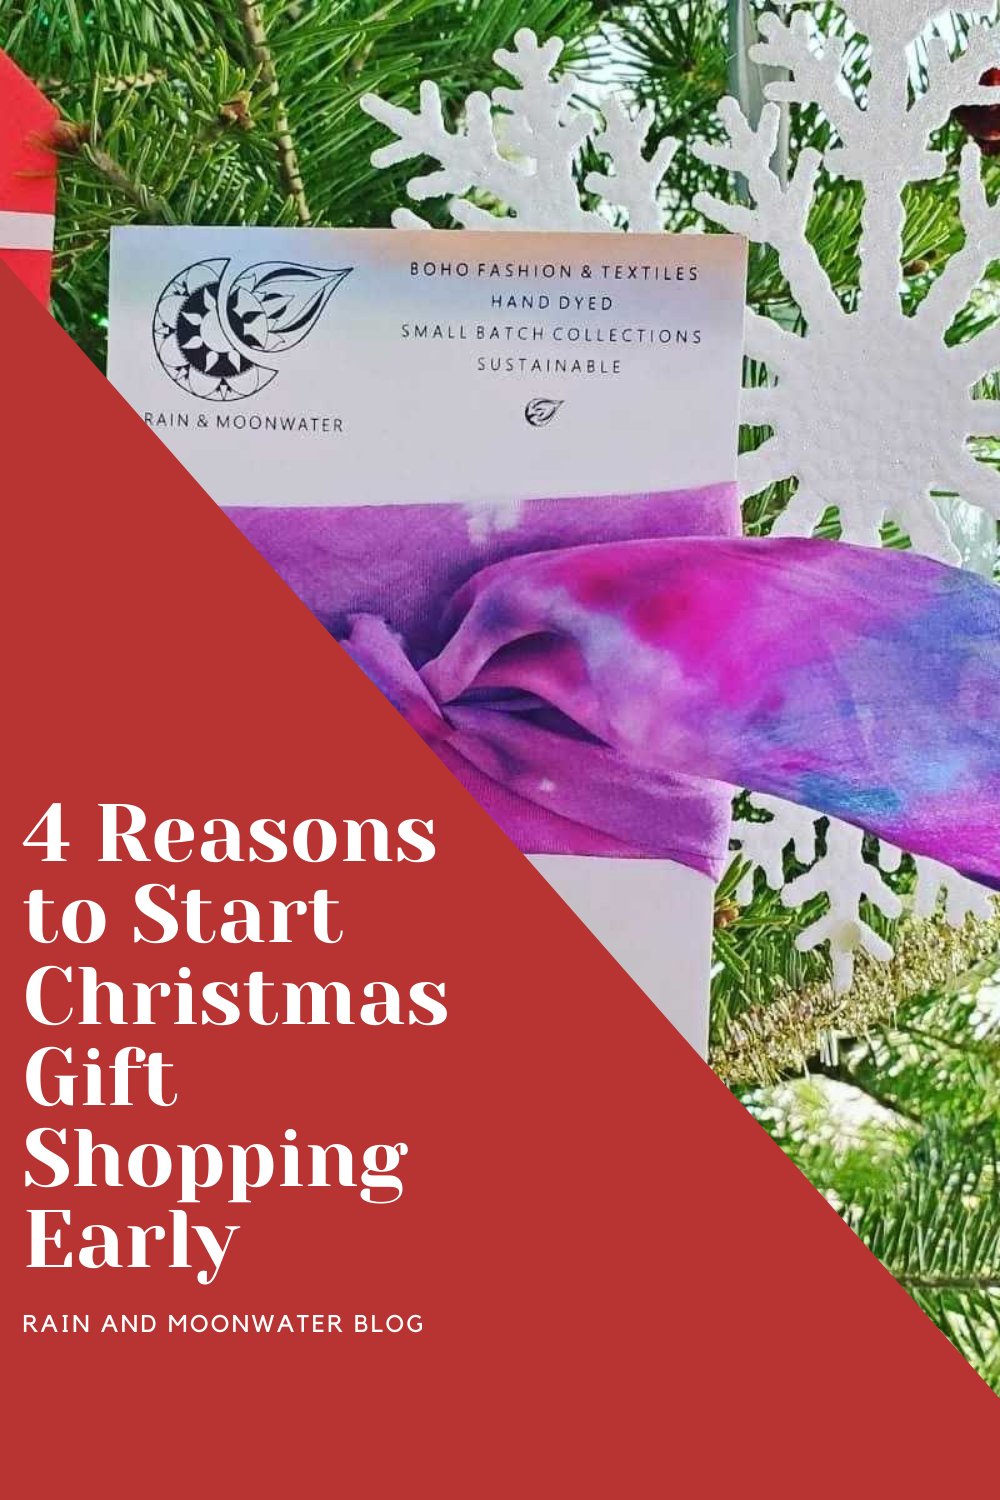 4 Reasons to Start Christmas Gift Shopping Early (with a list of local artists to consider) - RainandMoonwater